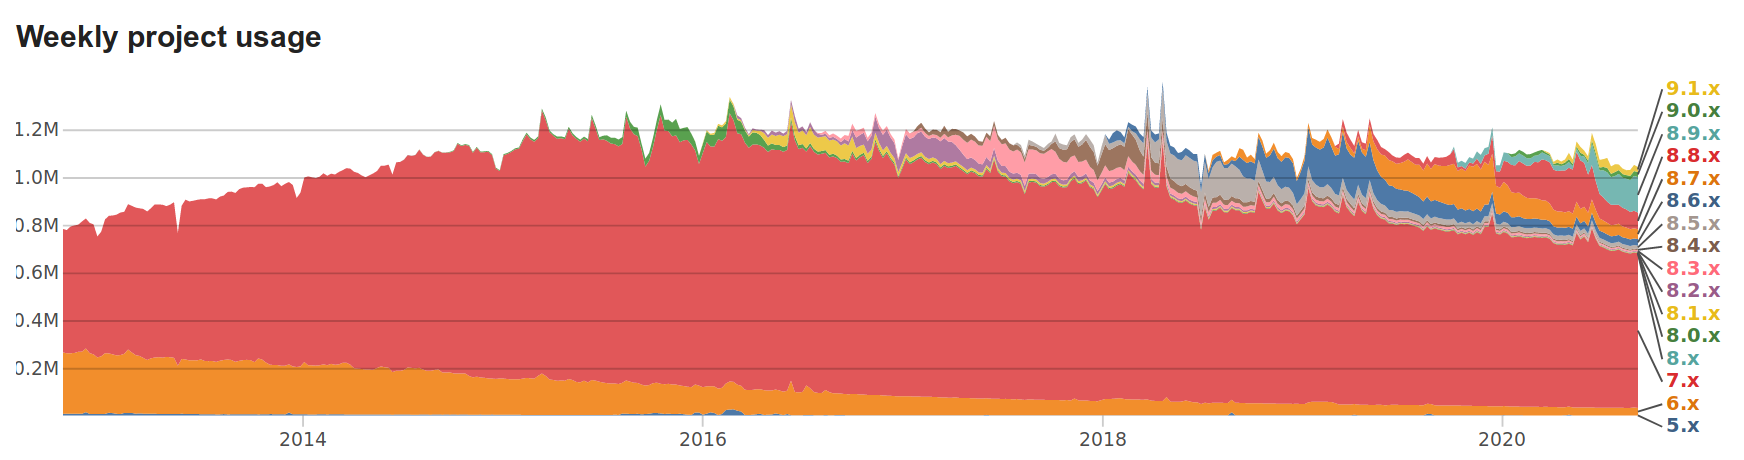 Drupal core weekly project usage